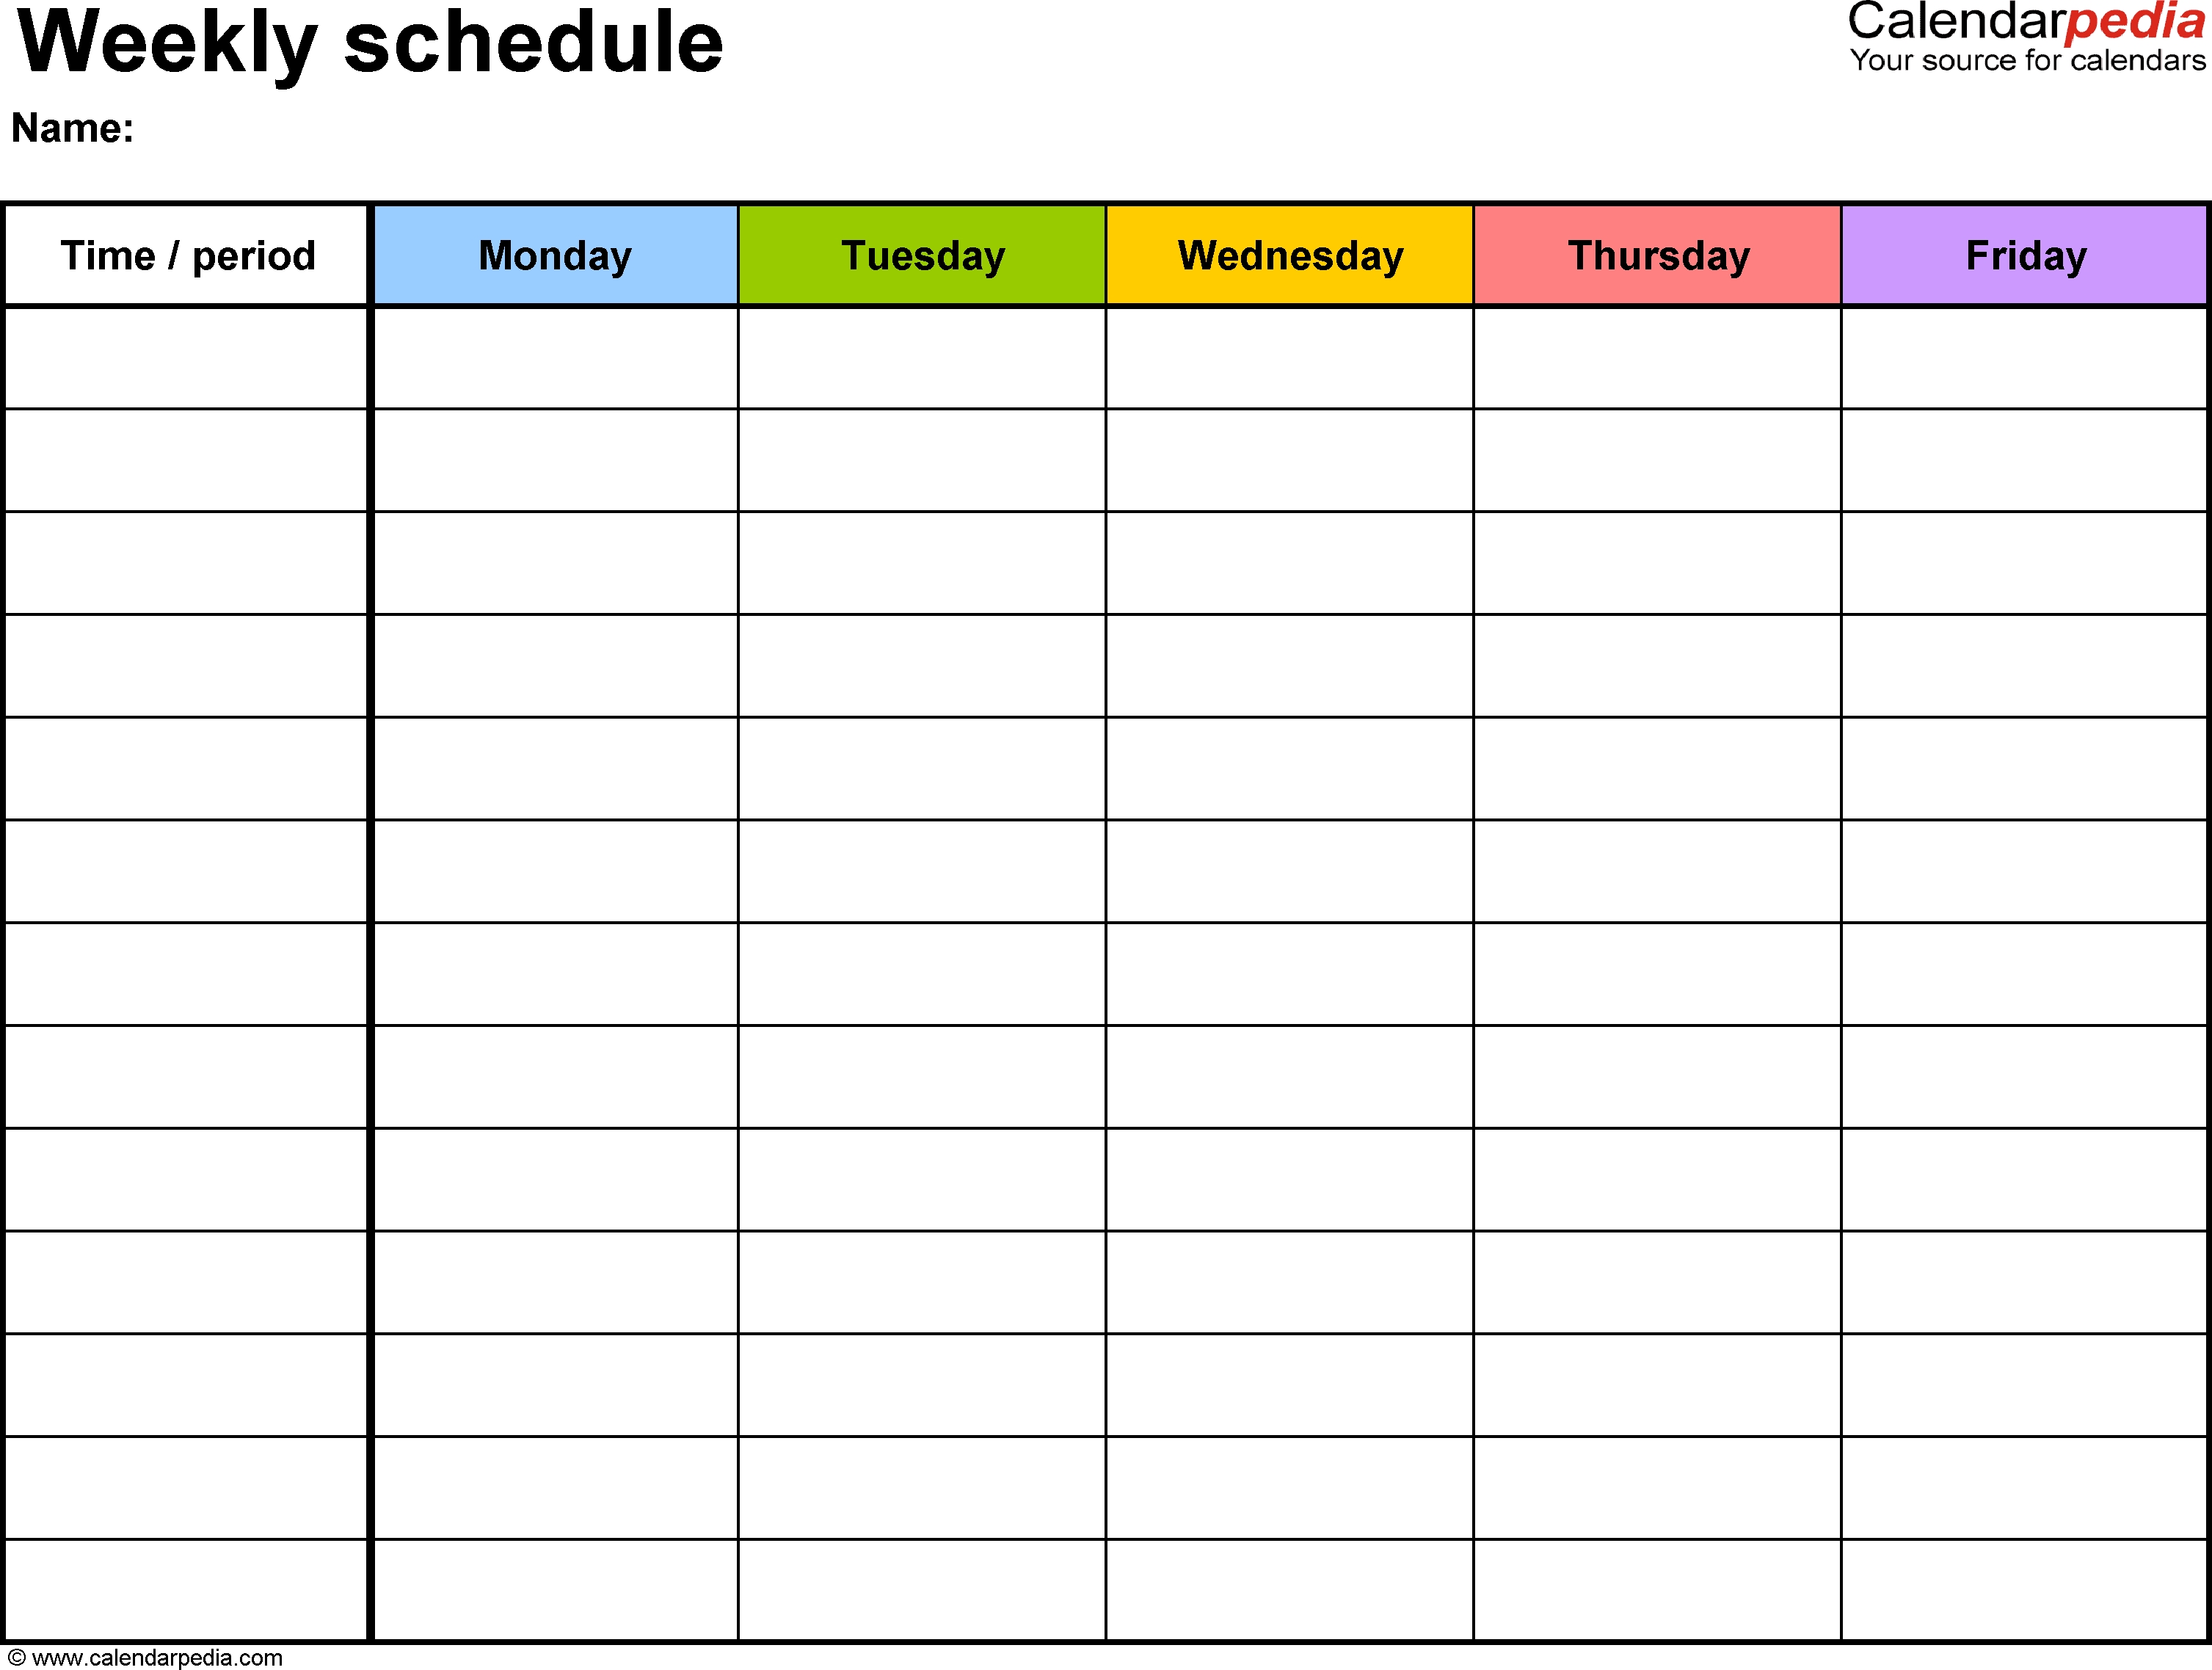 Free Weekly Schedule Templates For Excel - 18 Templates-Weekly Calendar 2020 Template Students 7 Days A Week